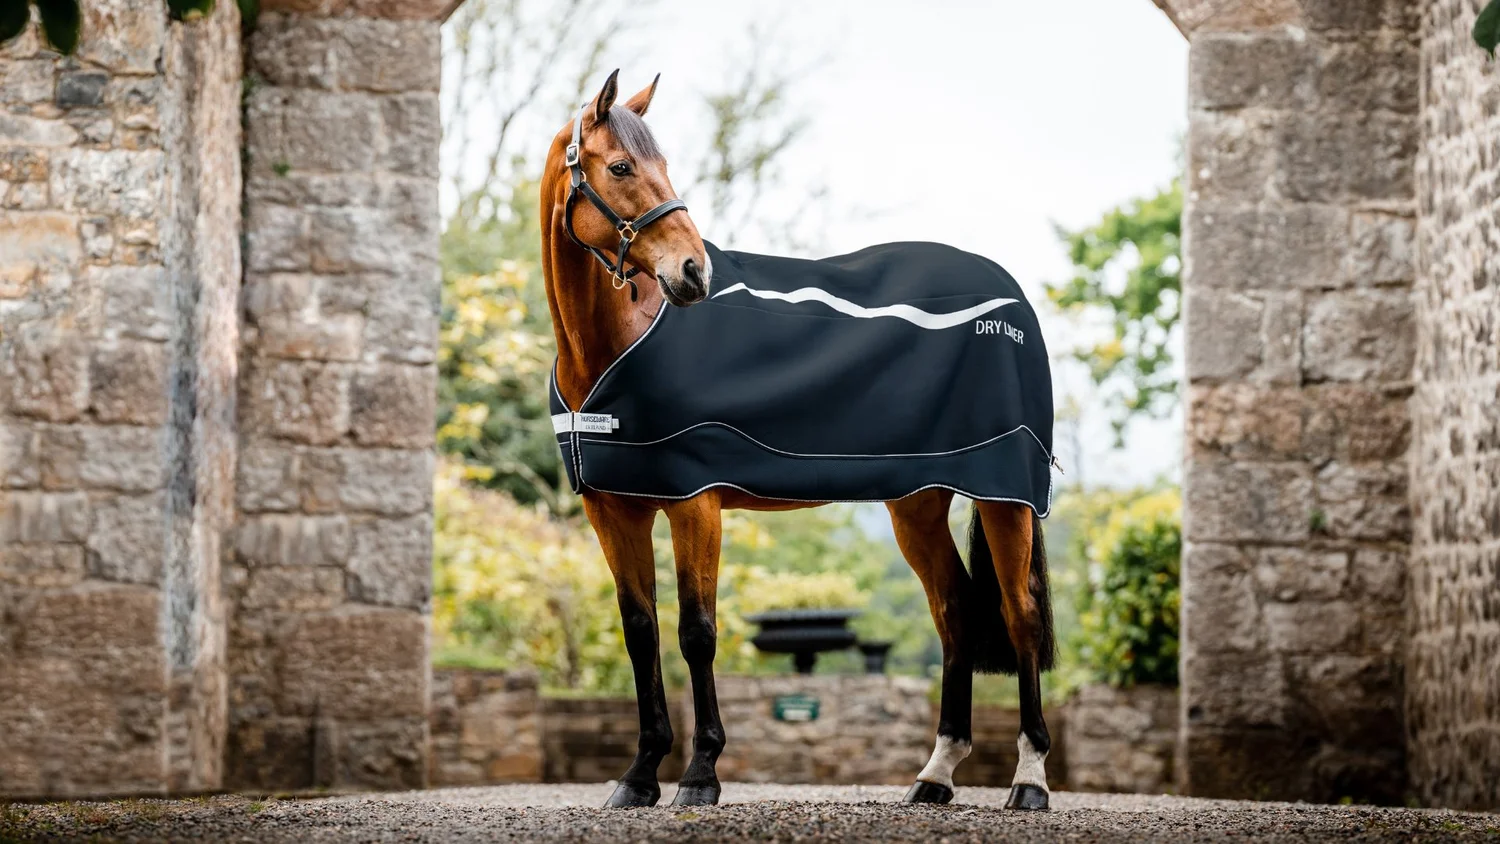 The Horseware Dry Liner - How to Guide